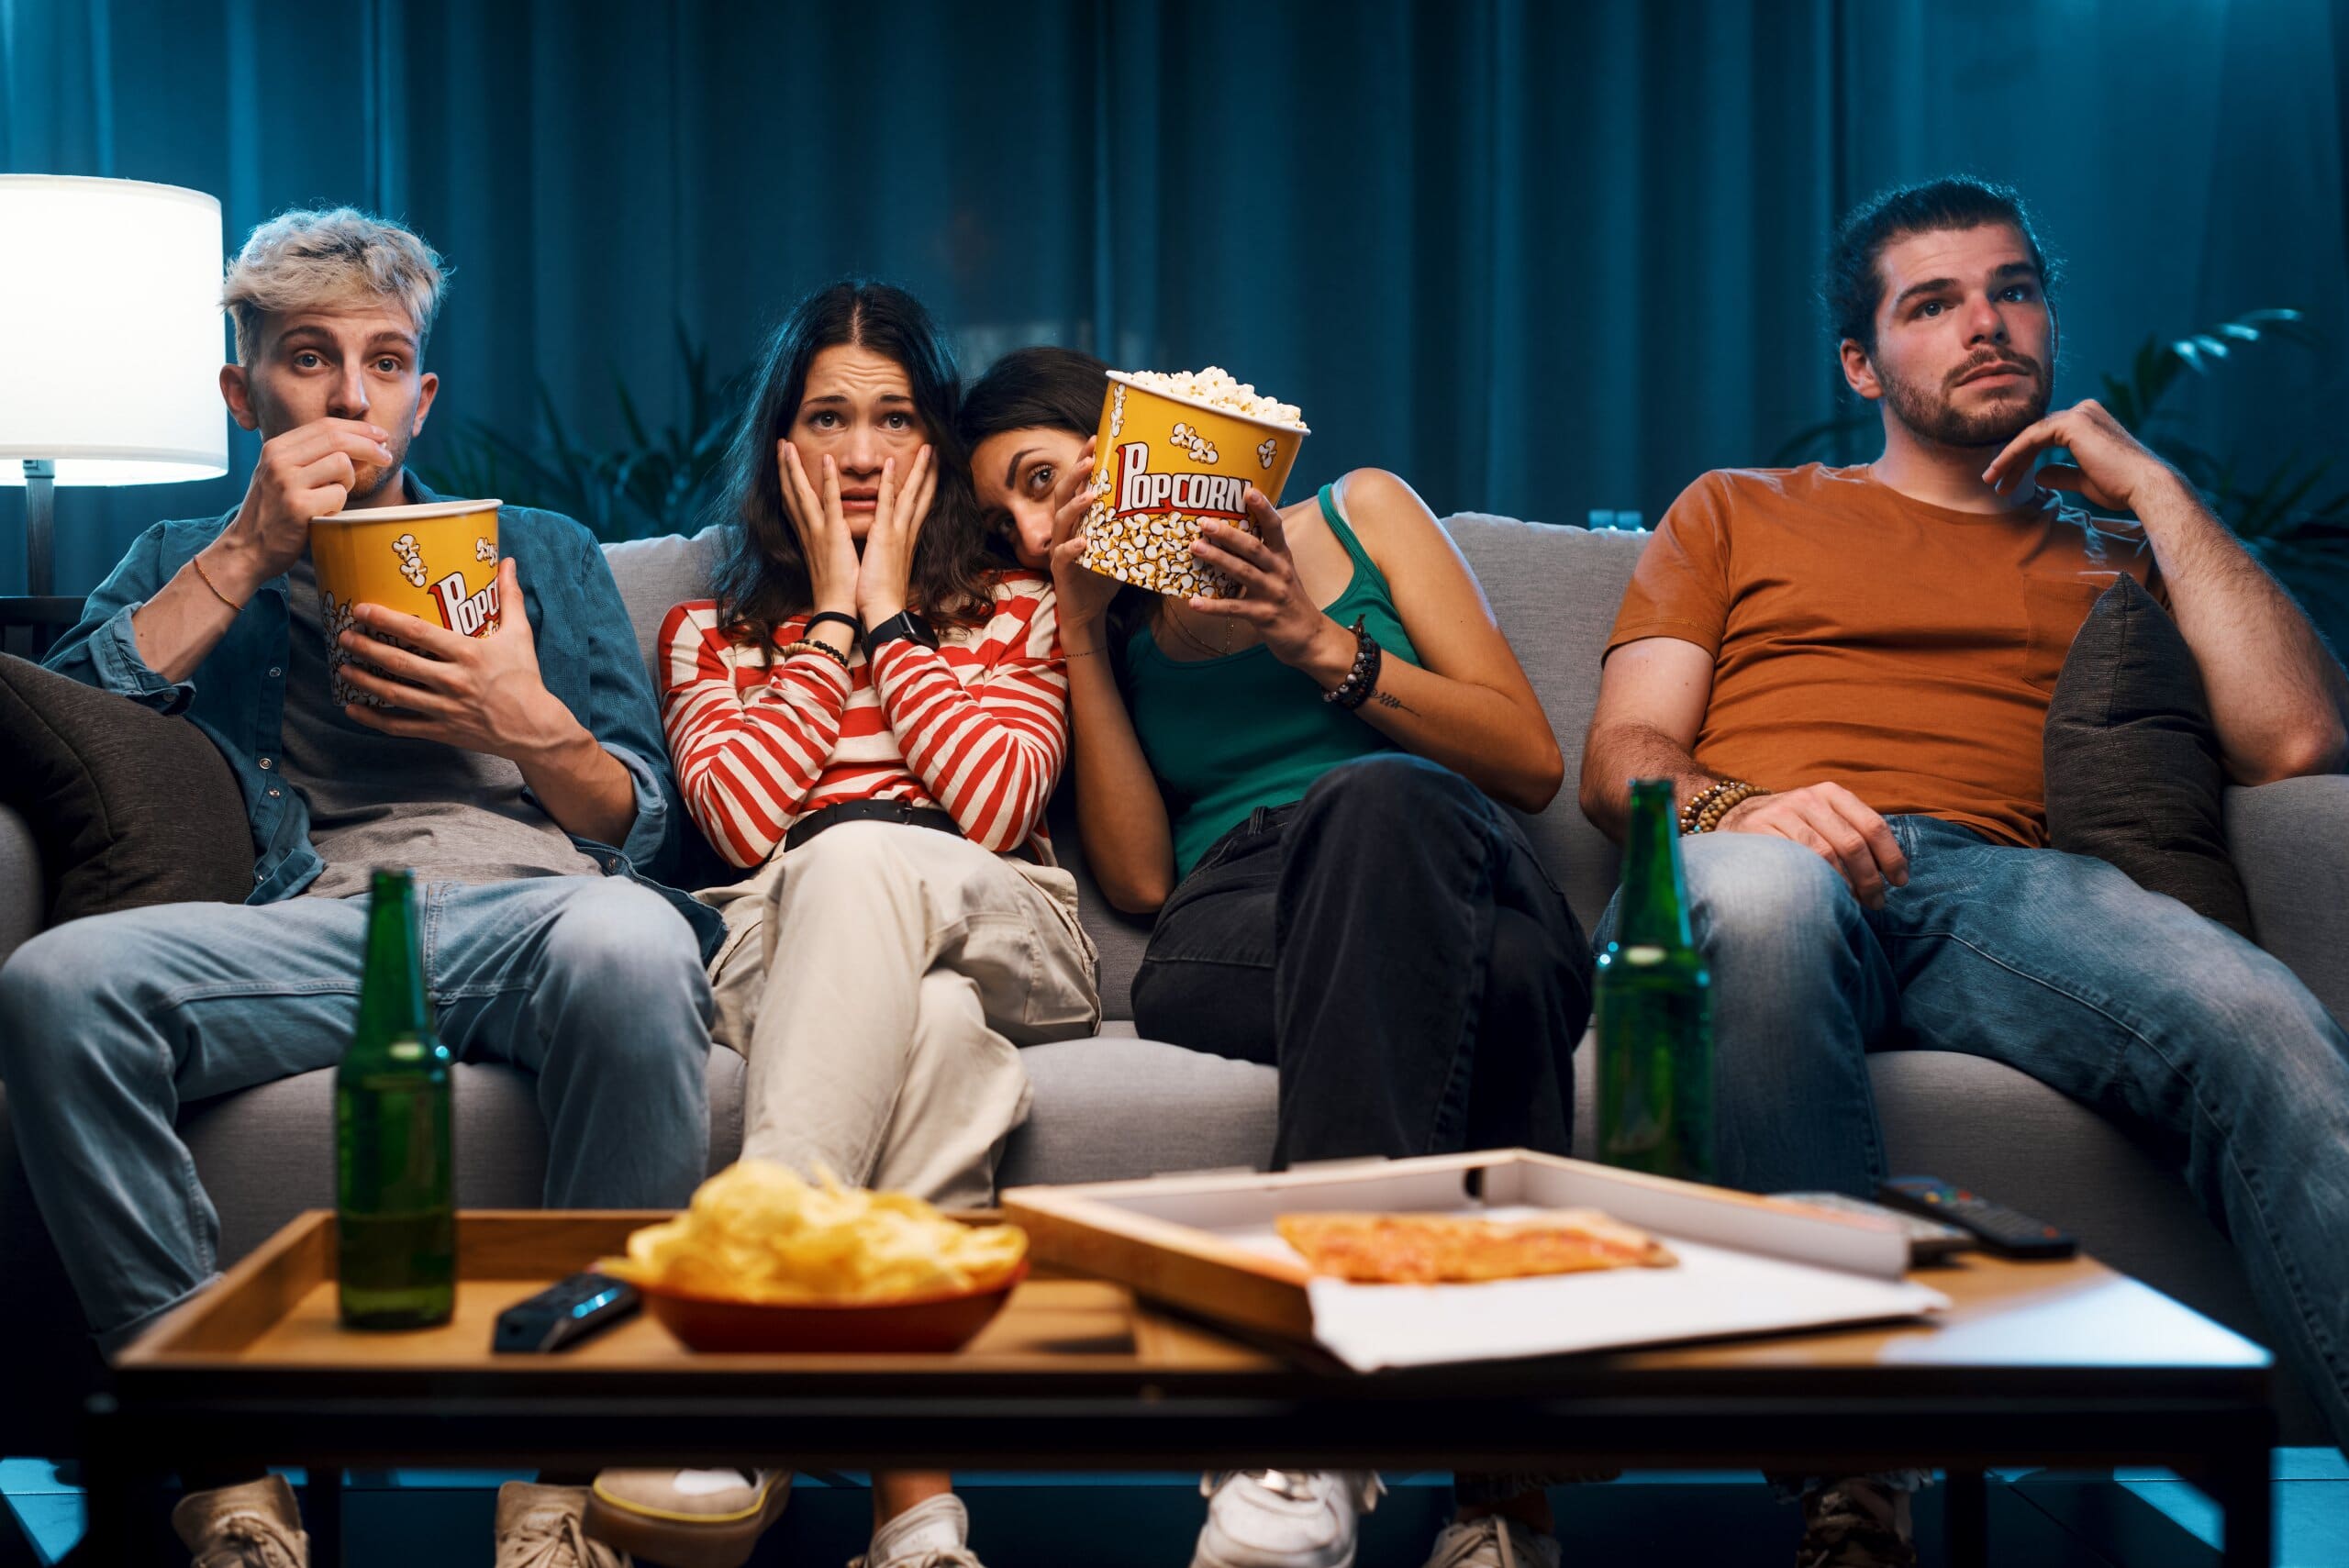 Group of four friends sitting on sofa with popcorn watching a scary film.